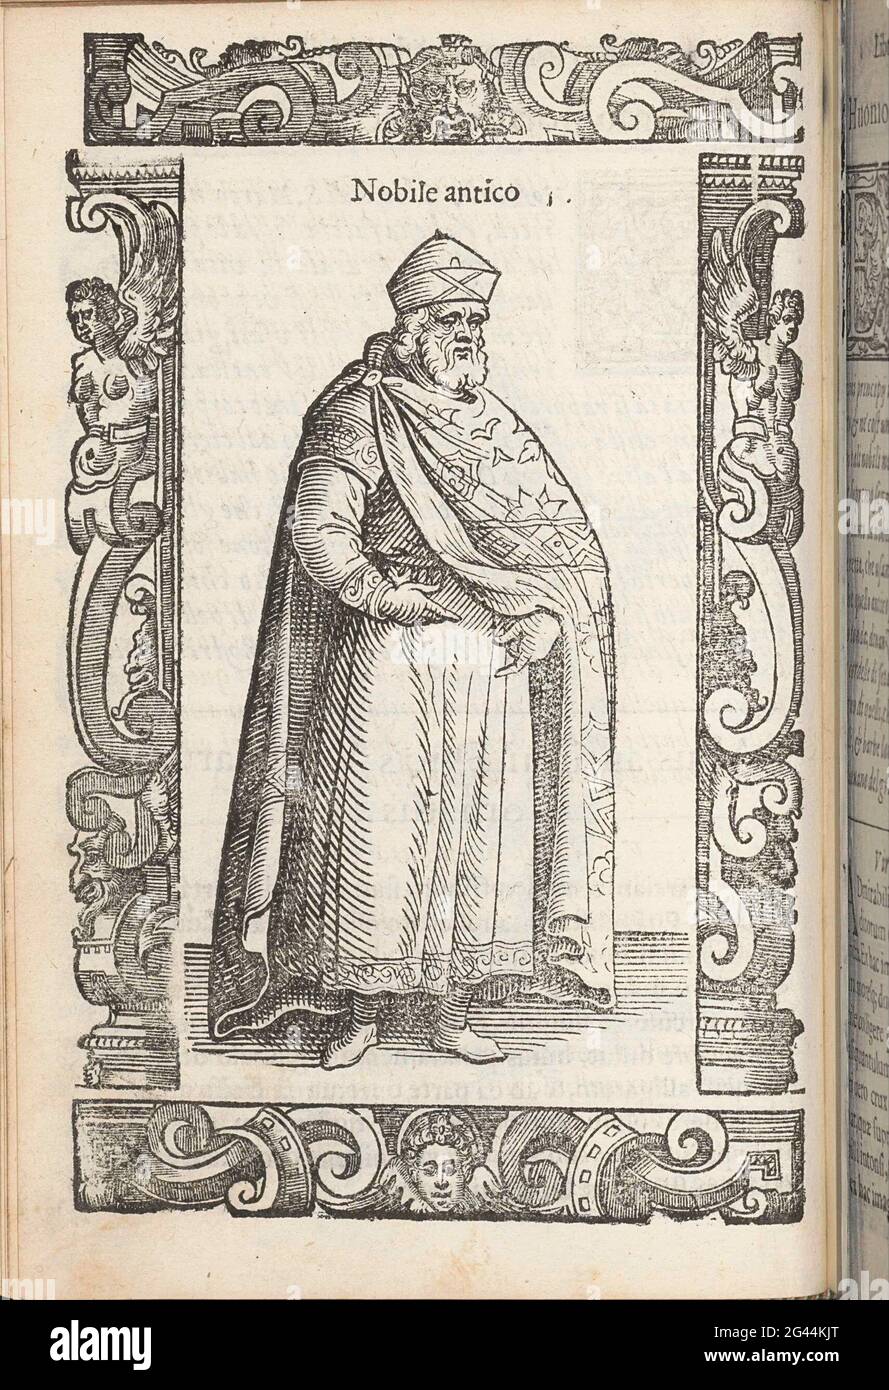 Noble Lord from the Old Venice; Ancient noble; Ancient habits, modern and modernisms around the world: new accesses of many figures: dressetus antiquorum, recentorumque totius orbis. Nobility Lord from Venice in A Suit That is an imitation of the doge. Sottana About Which An Embroidered Shoulder Sheath. Round Hat With Pointed Globe. In Ornament Edge. Stock Photo